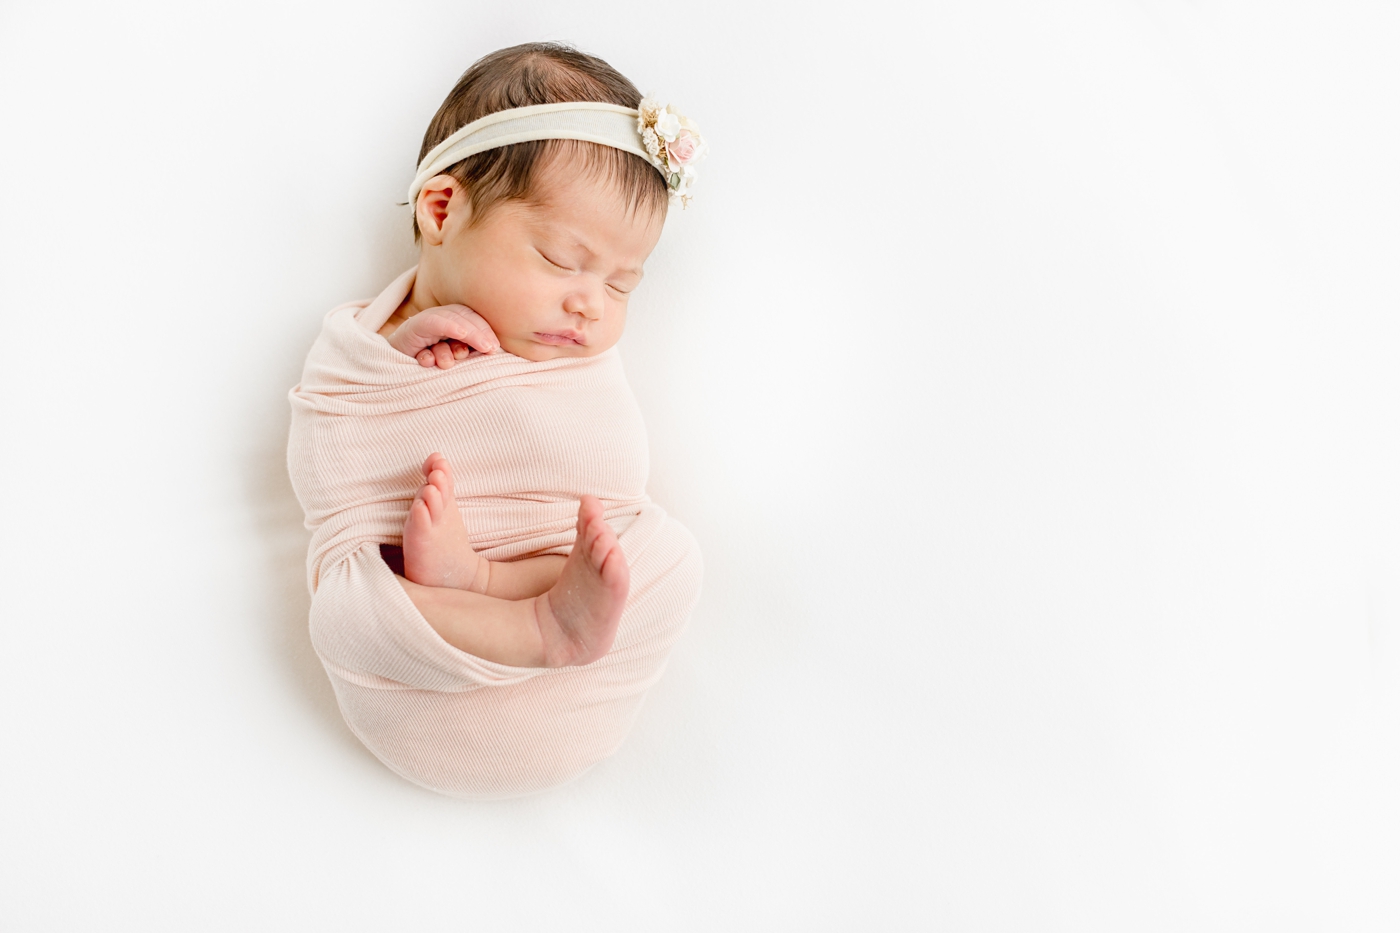 Baby in pink swaddle with toes unwrapped by Austin photographer, Sana Ahmed Photography.